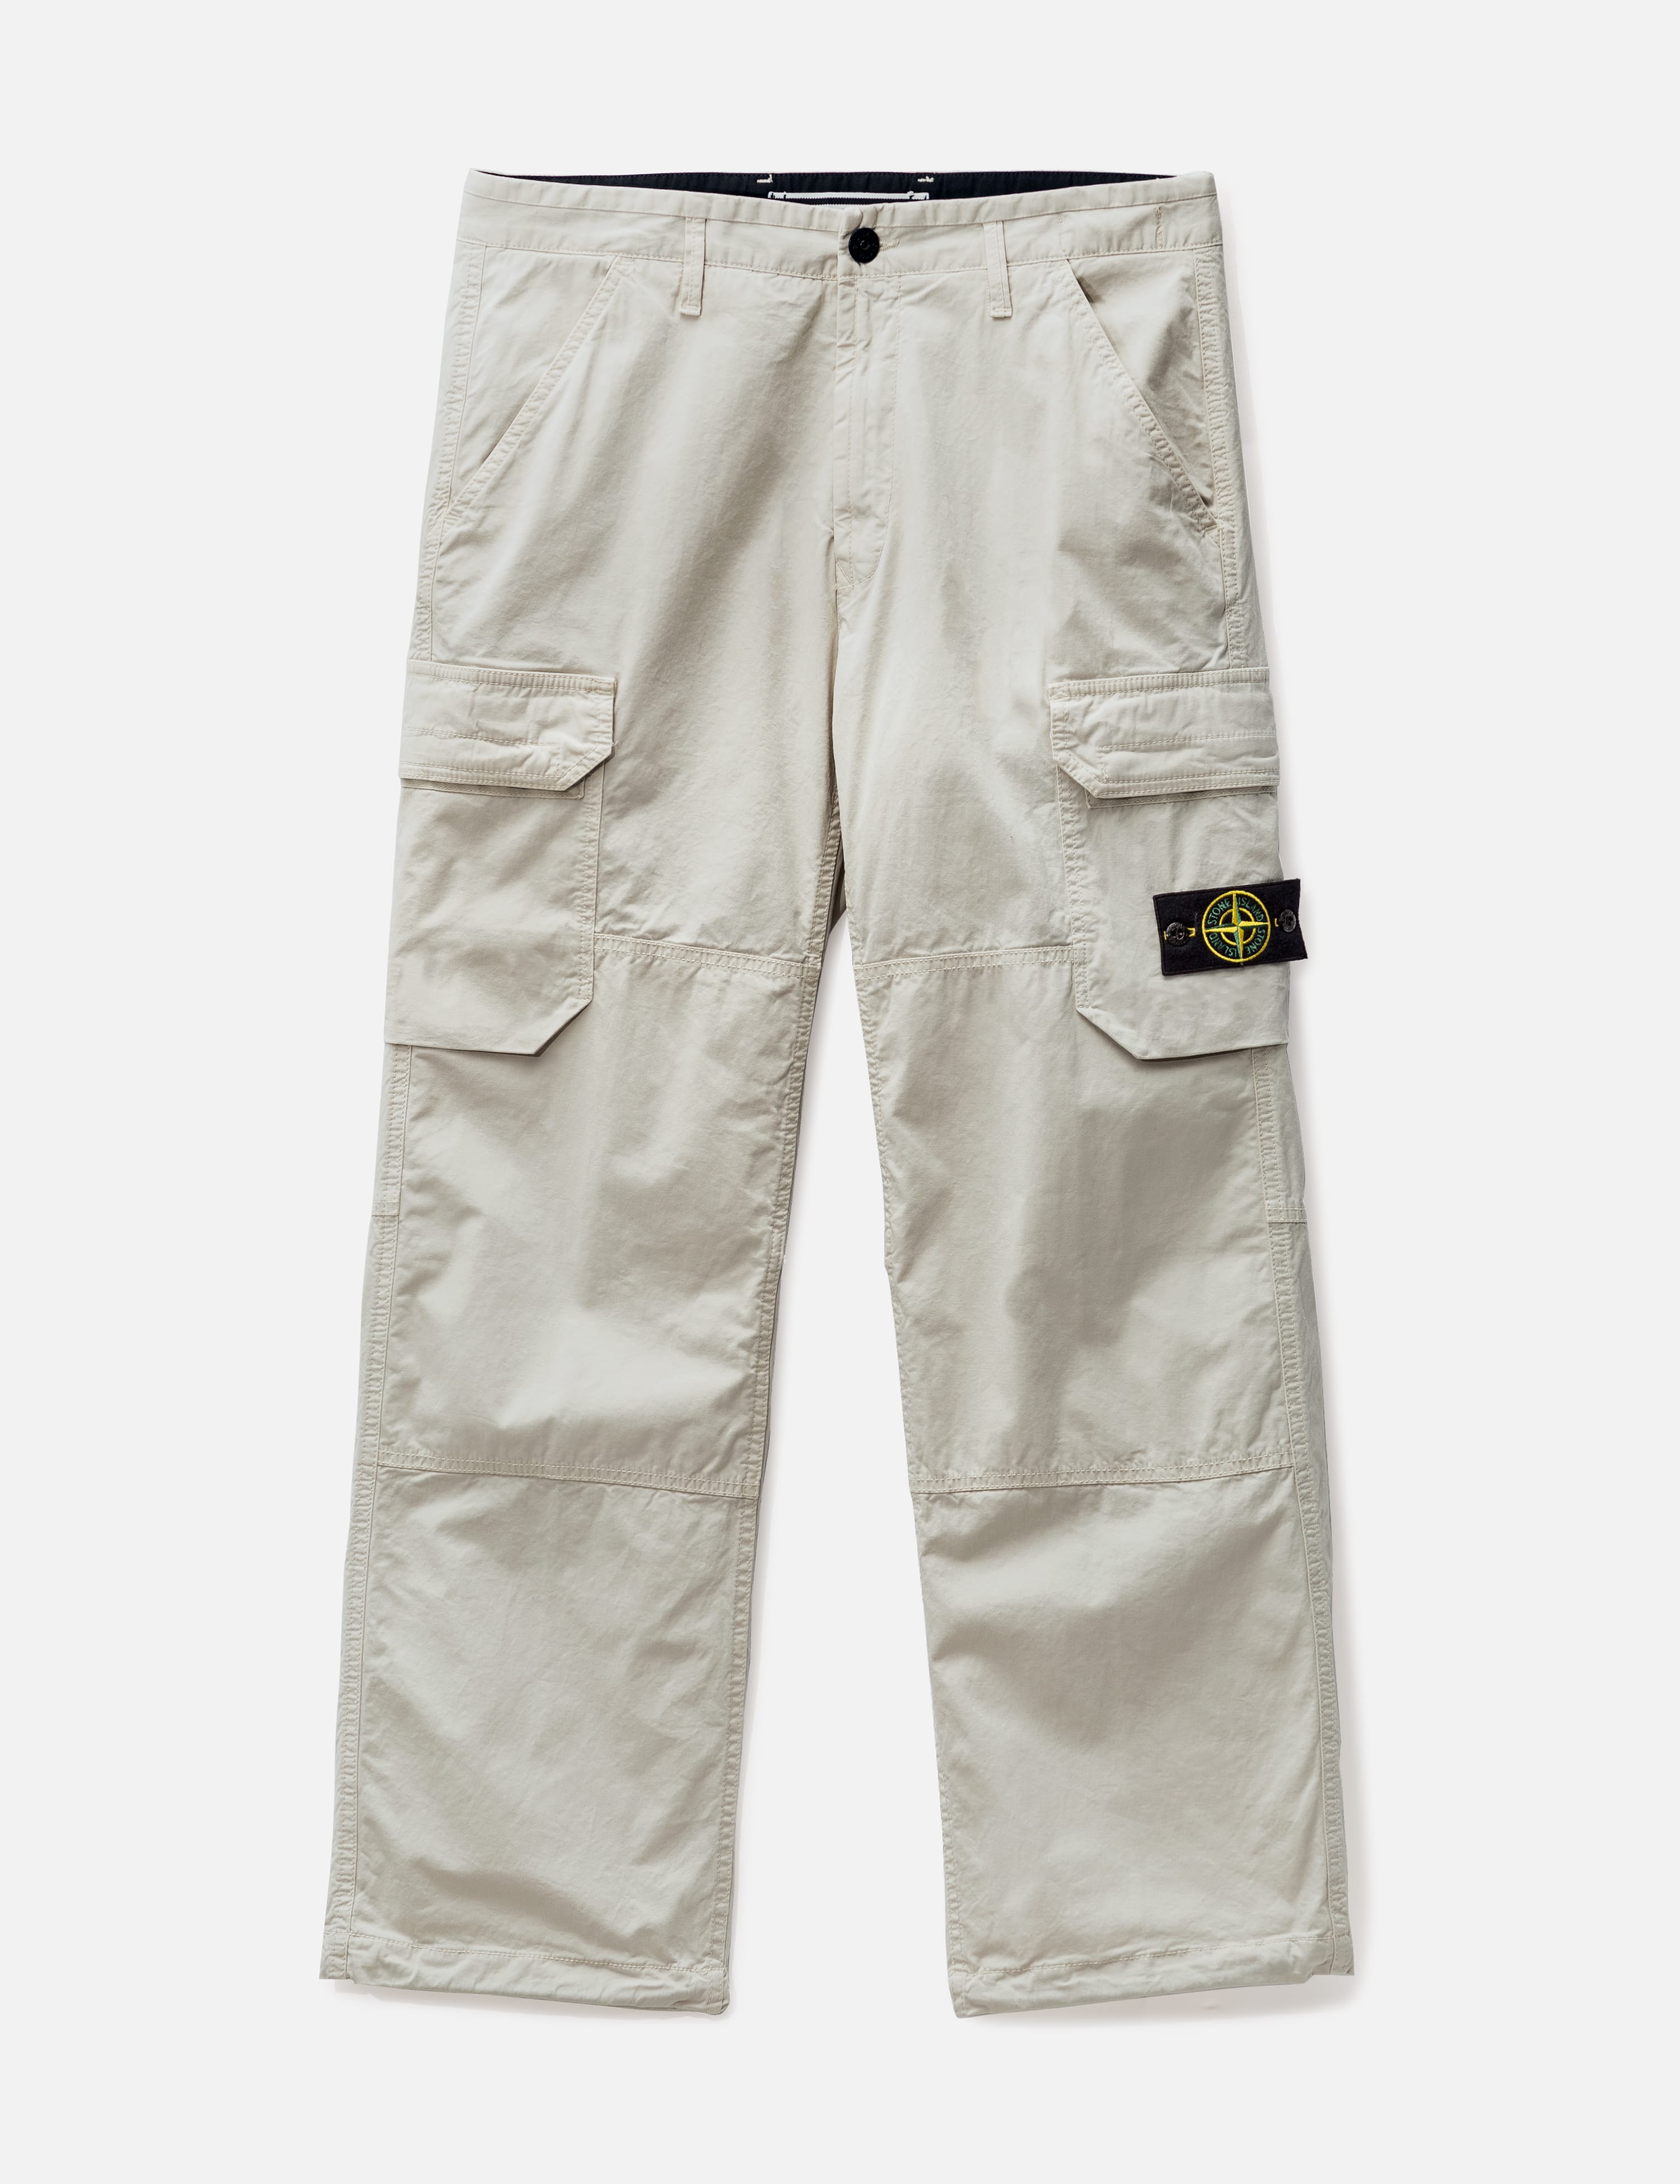 Pants   HBX   Globally Curated Fashion and Lifestyle by Hypebeast